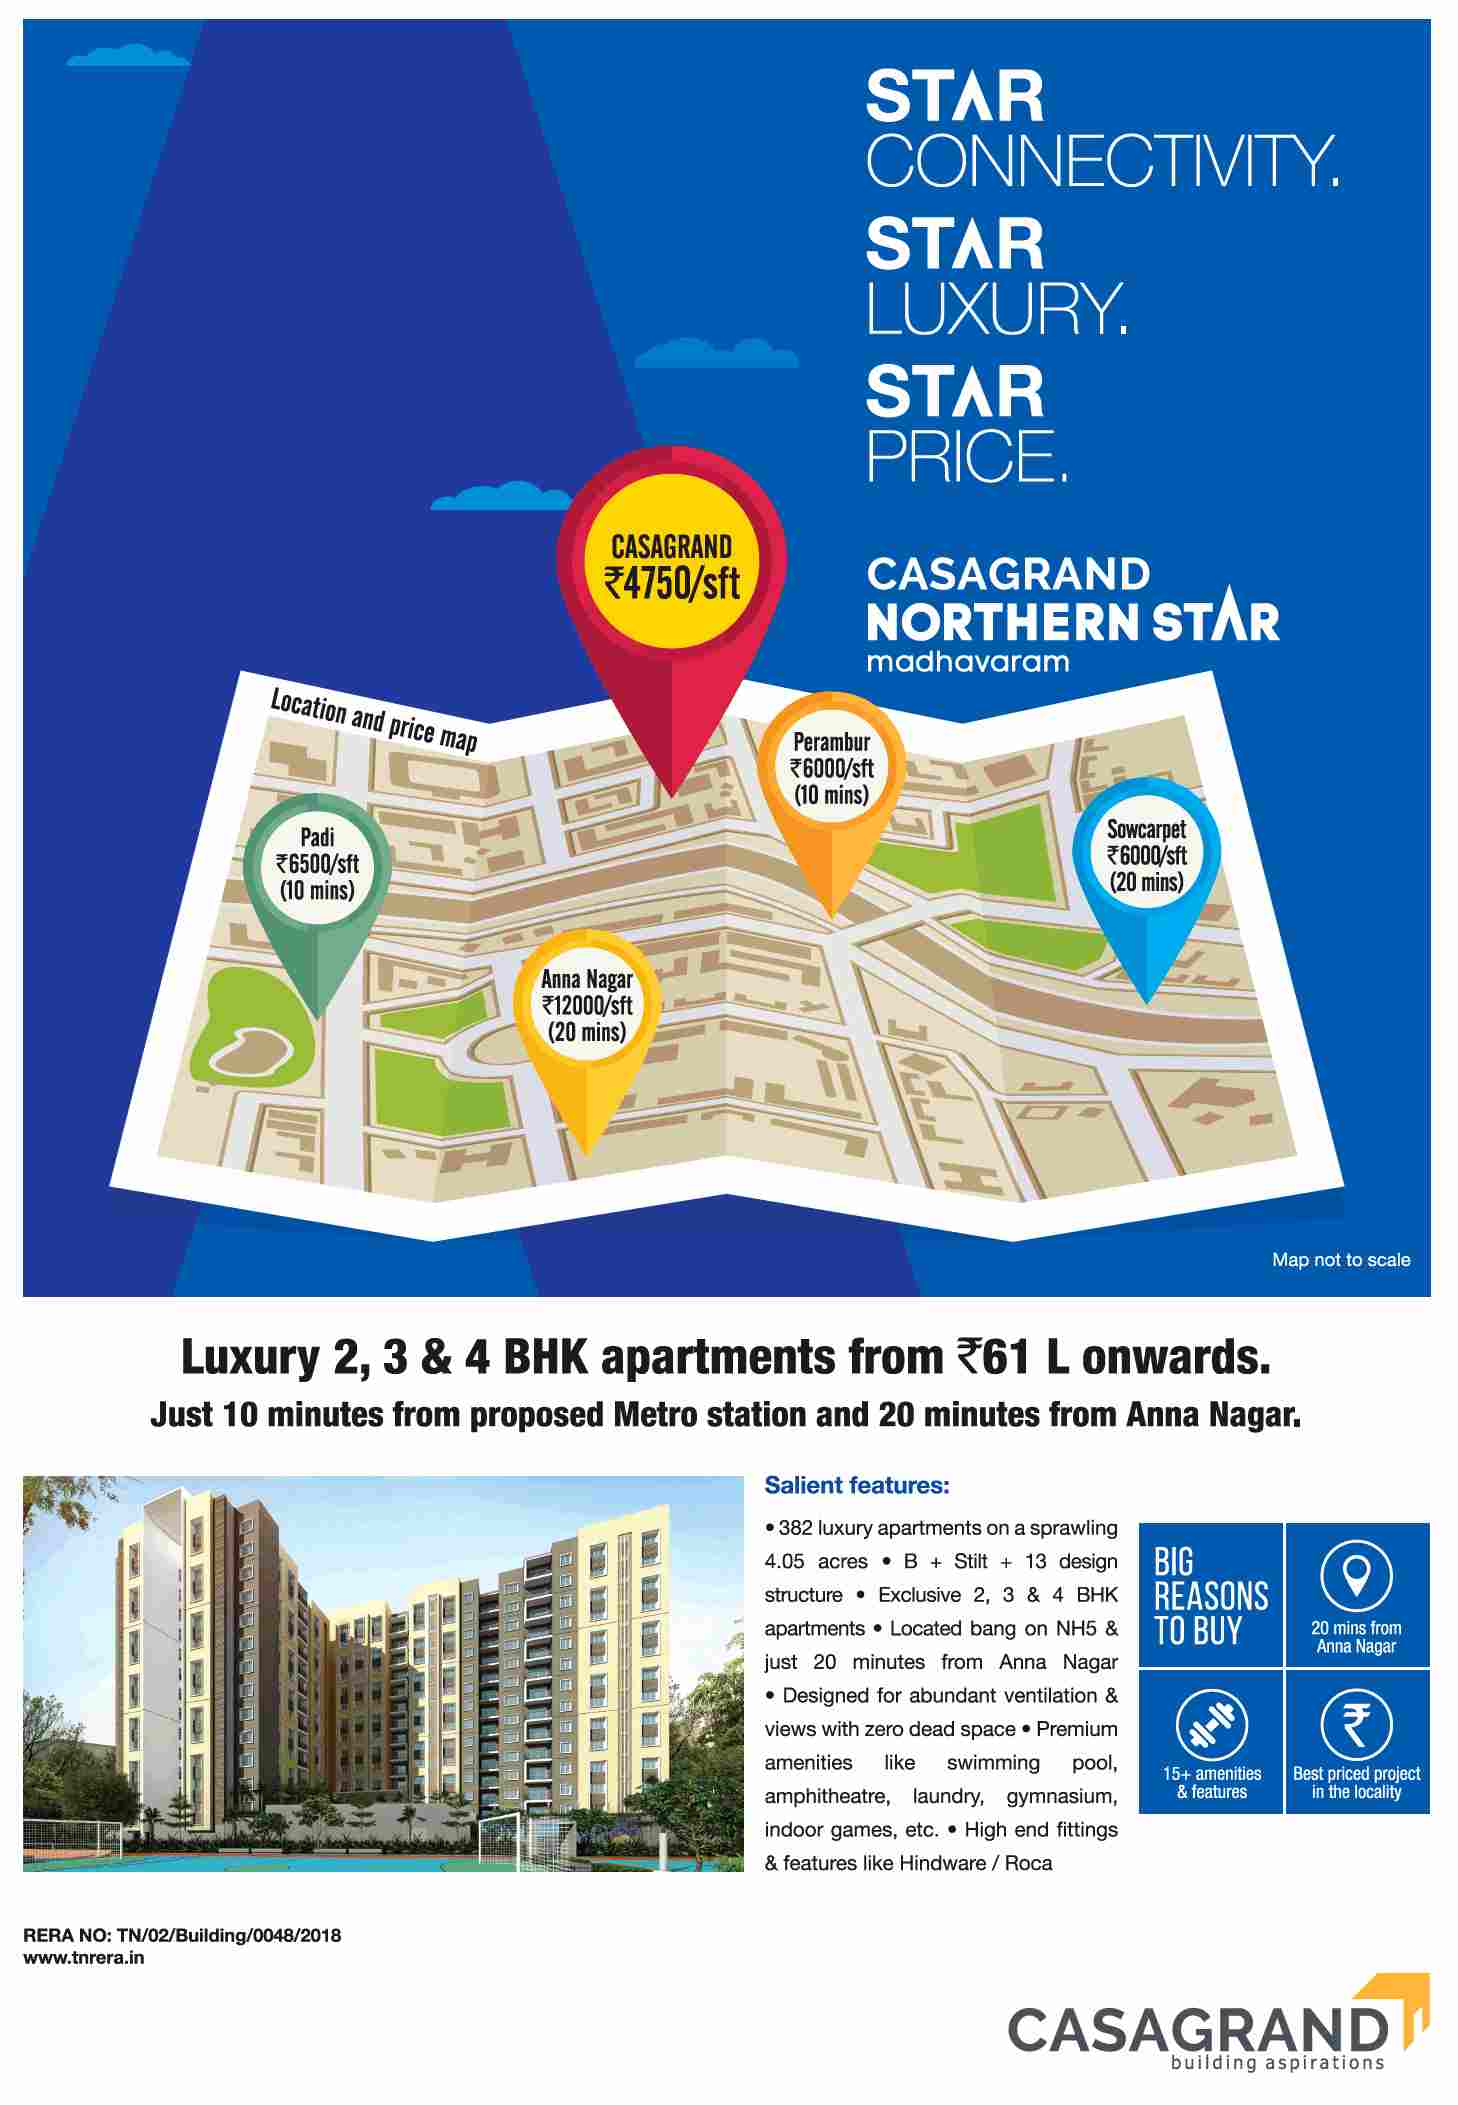 Book luxurious homes @ Rs 4750 per sqft at Casagrand Northern Star in Madhavaram, Chennai Update